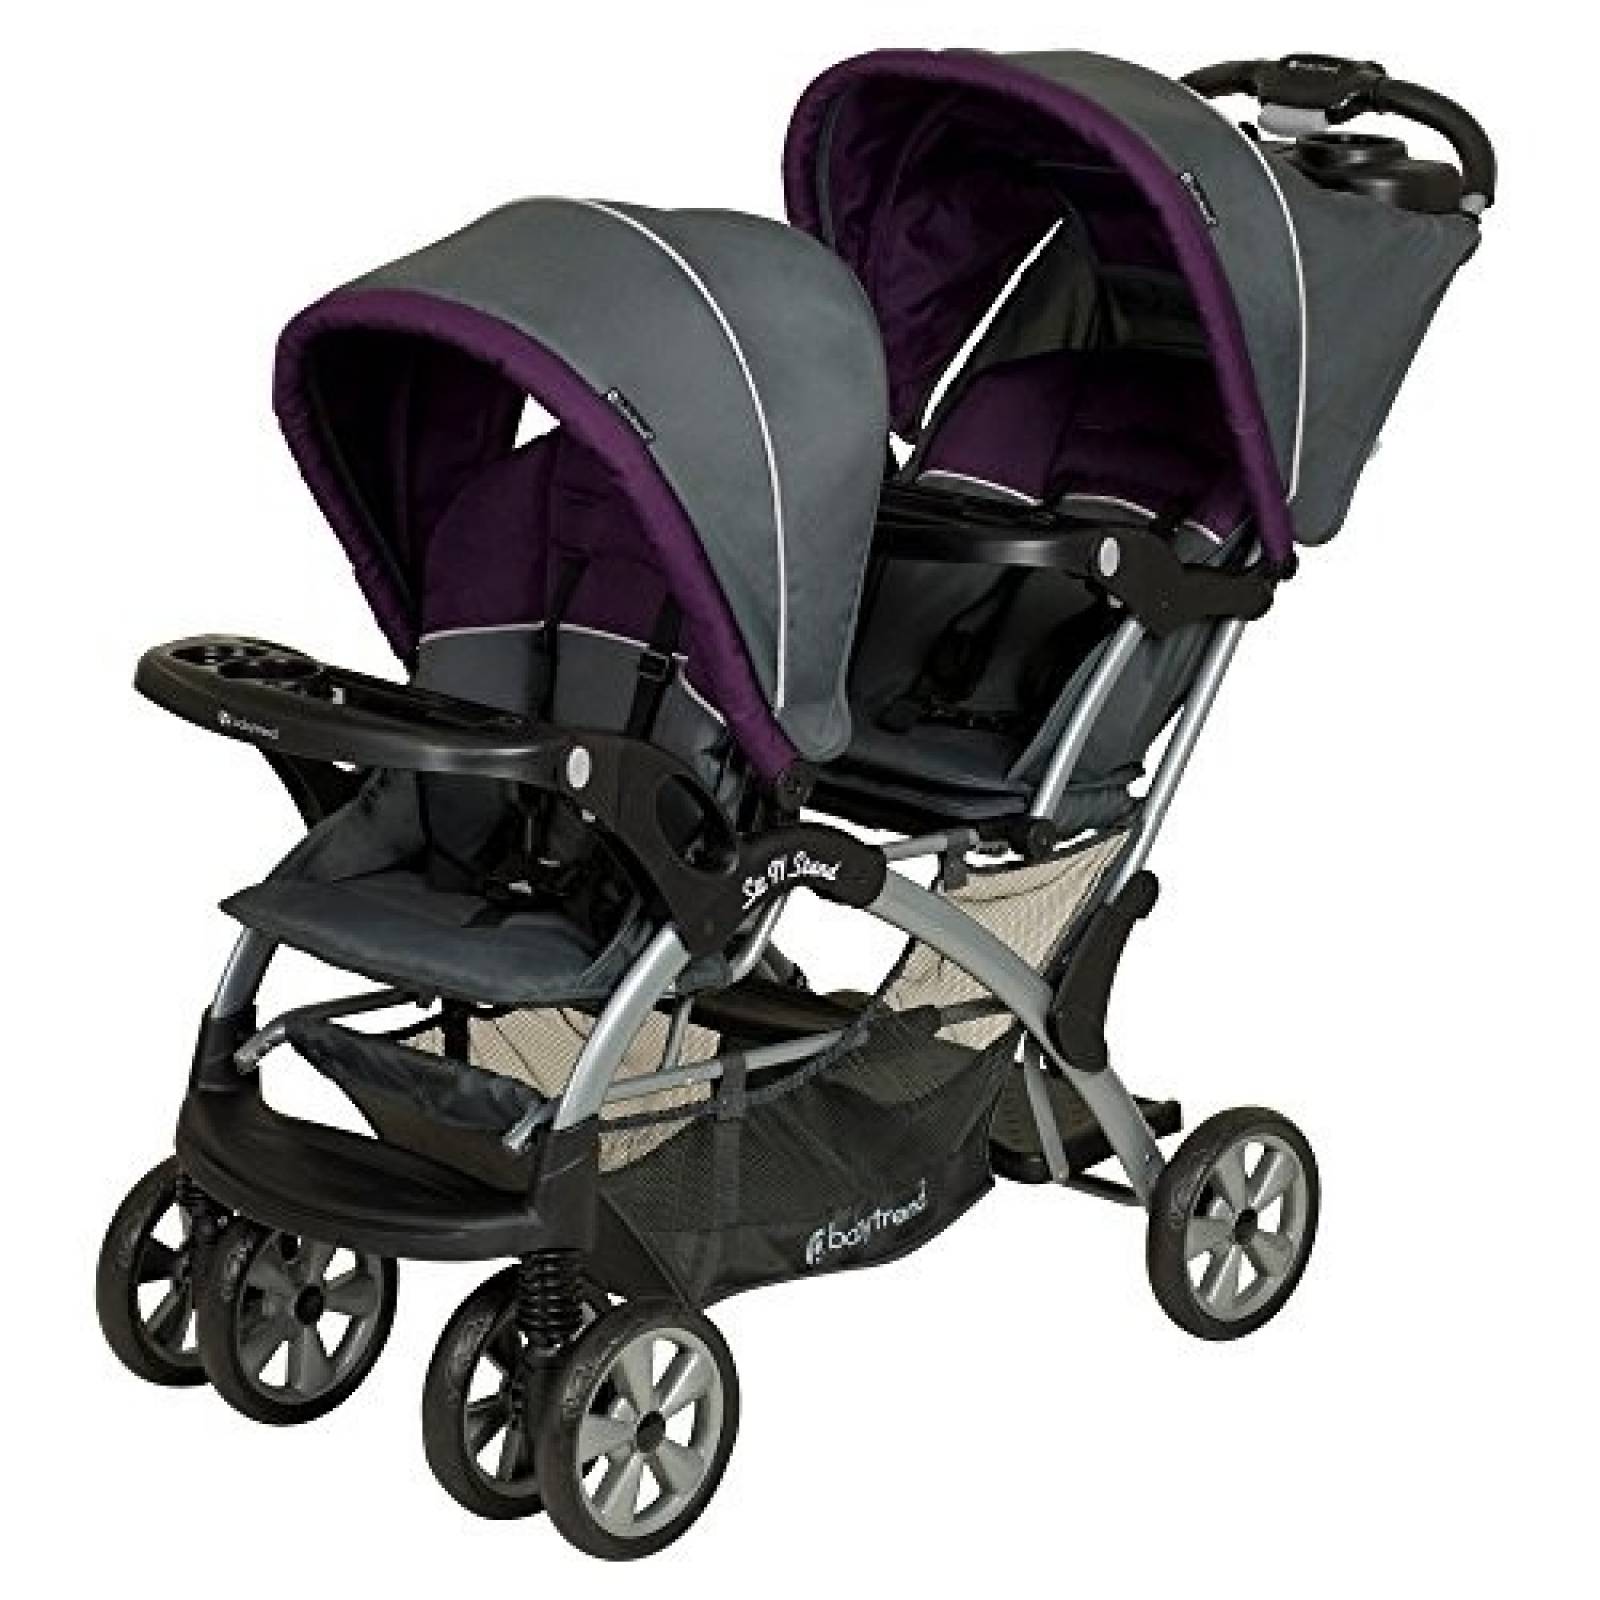 Carriola doble Baby Trend Sit n stand -Gris